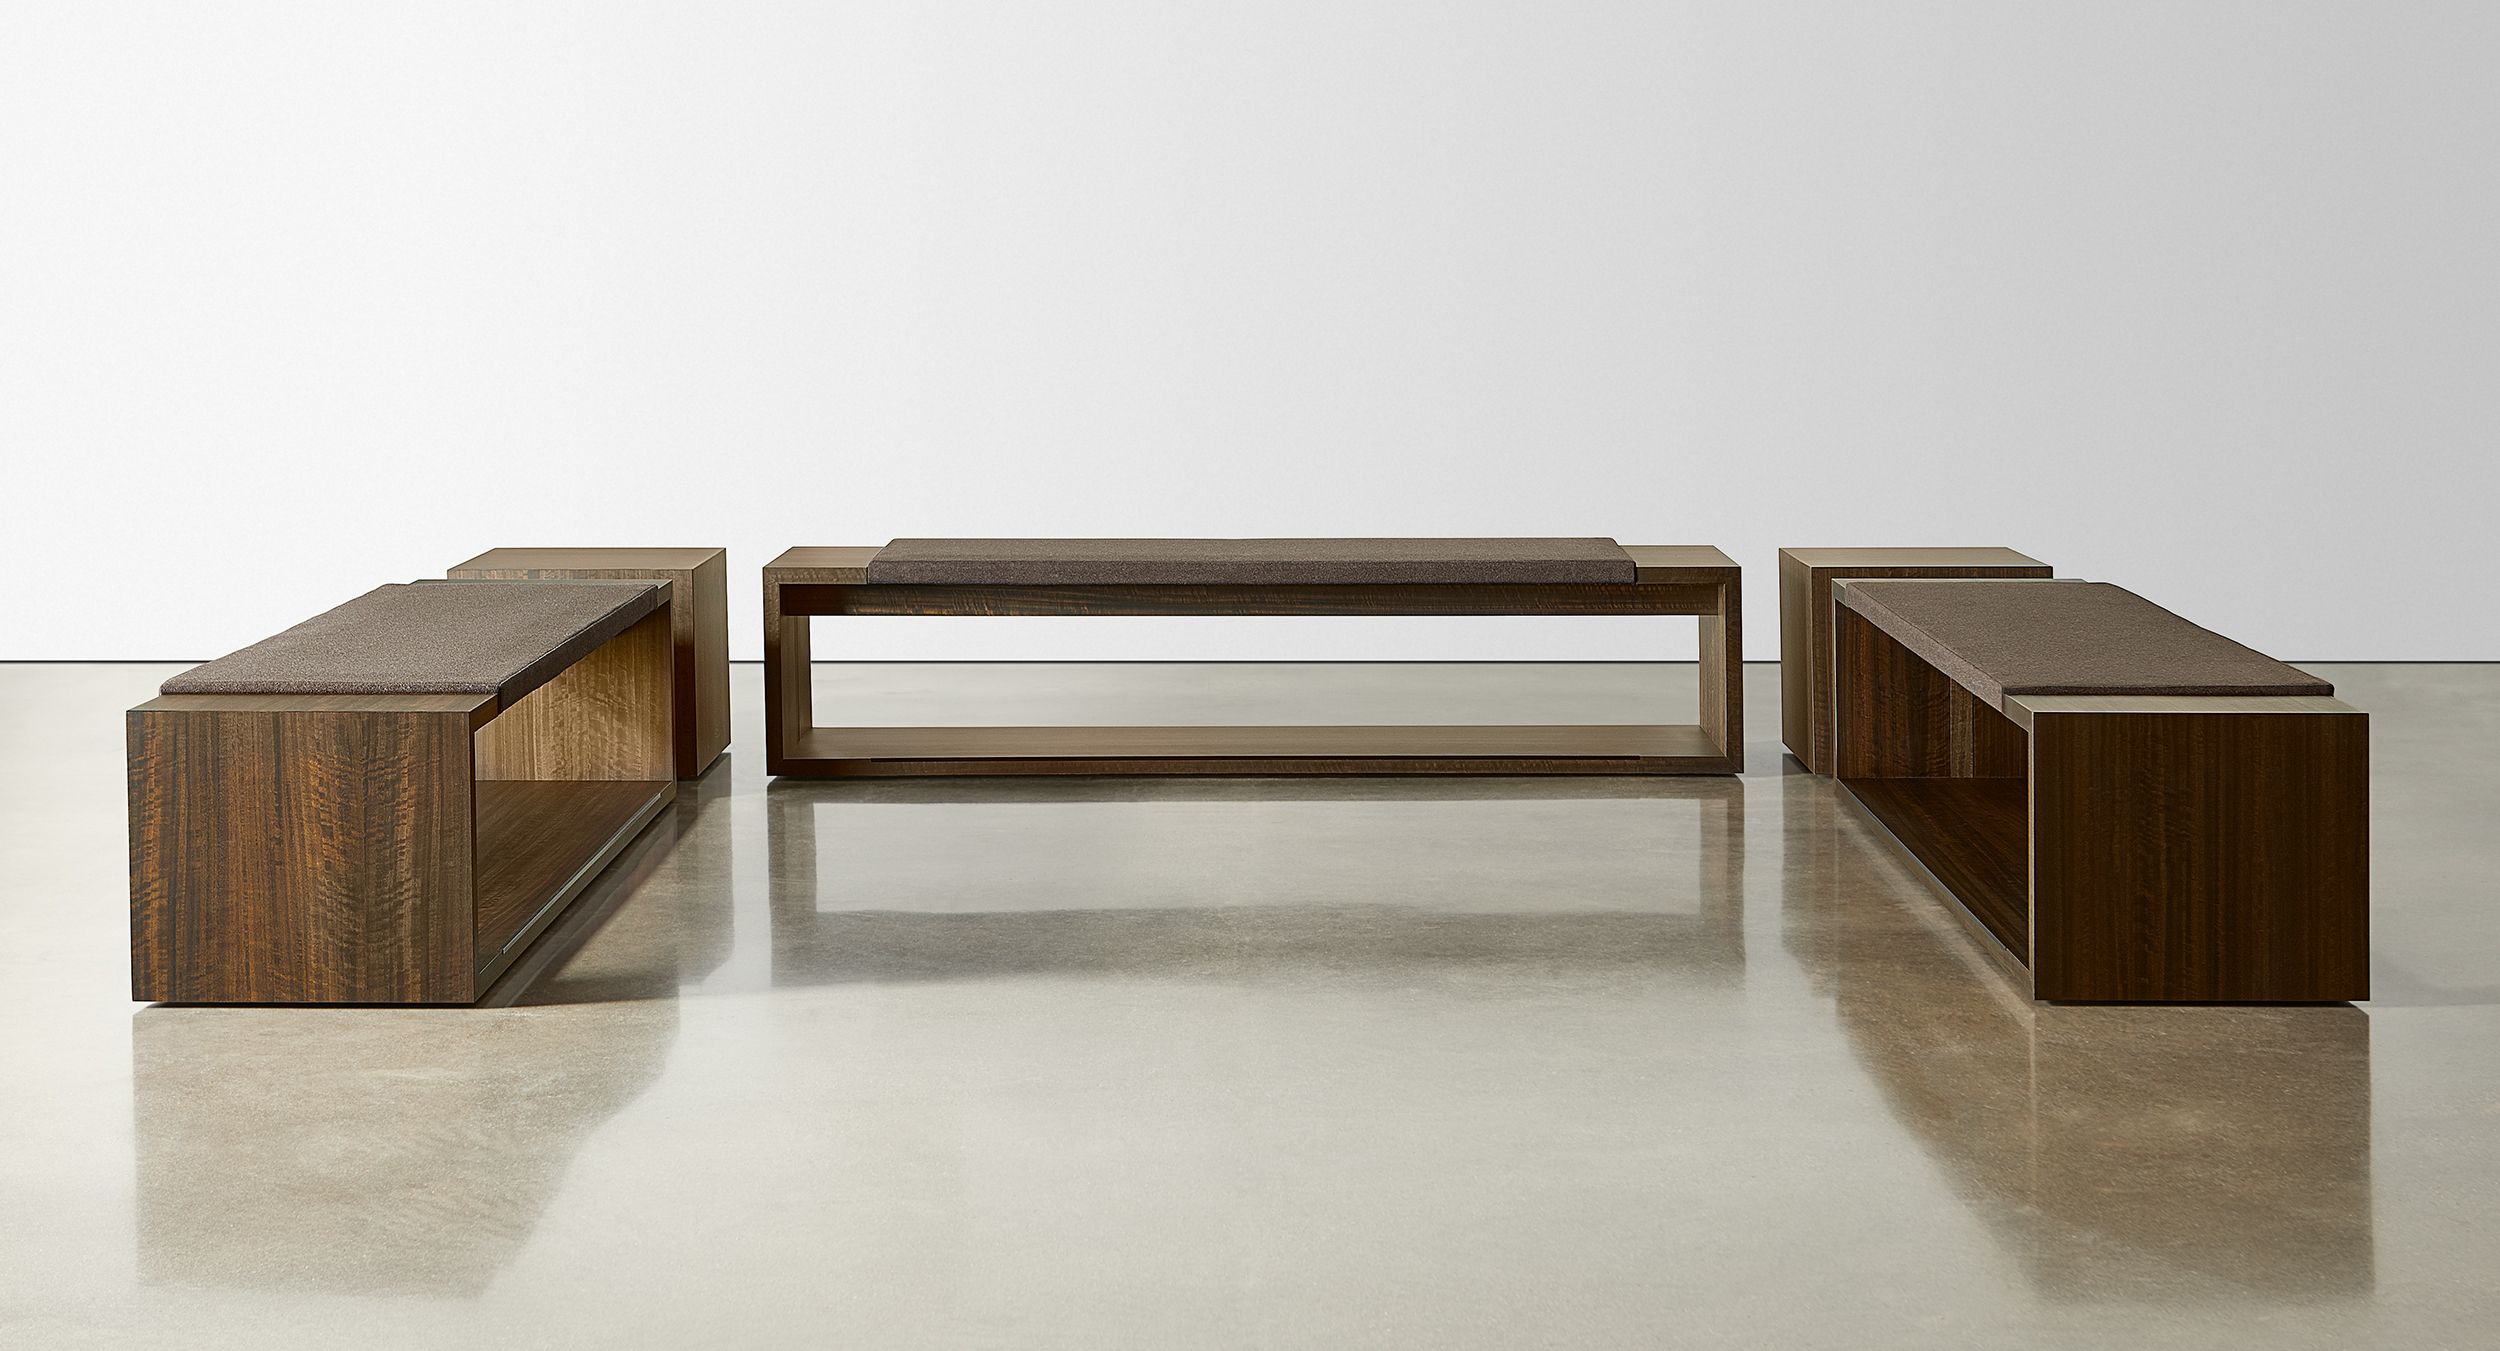 Oxer incorporates minimalist lines into a bench seating design that speaks to simplicity and modernism.